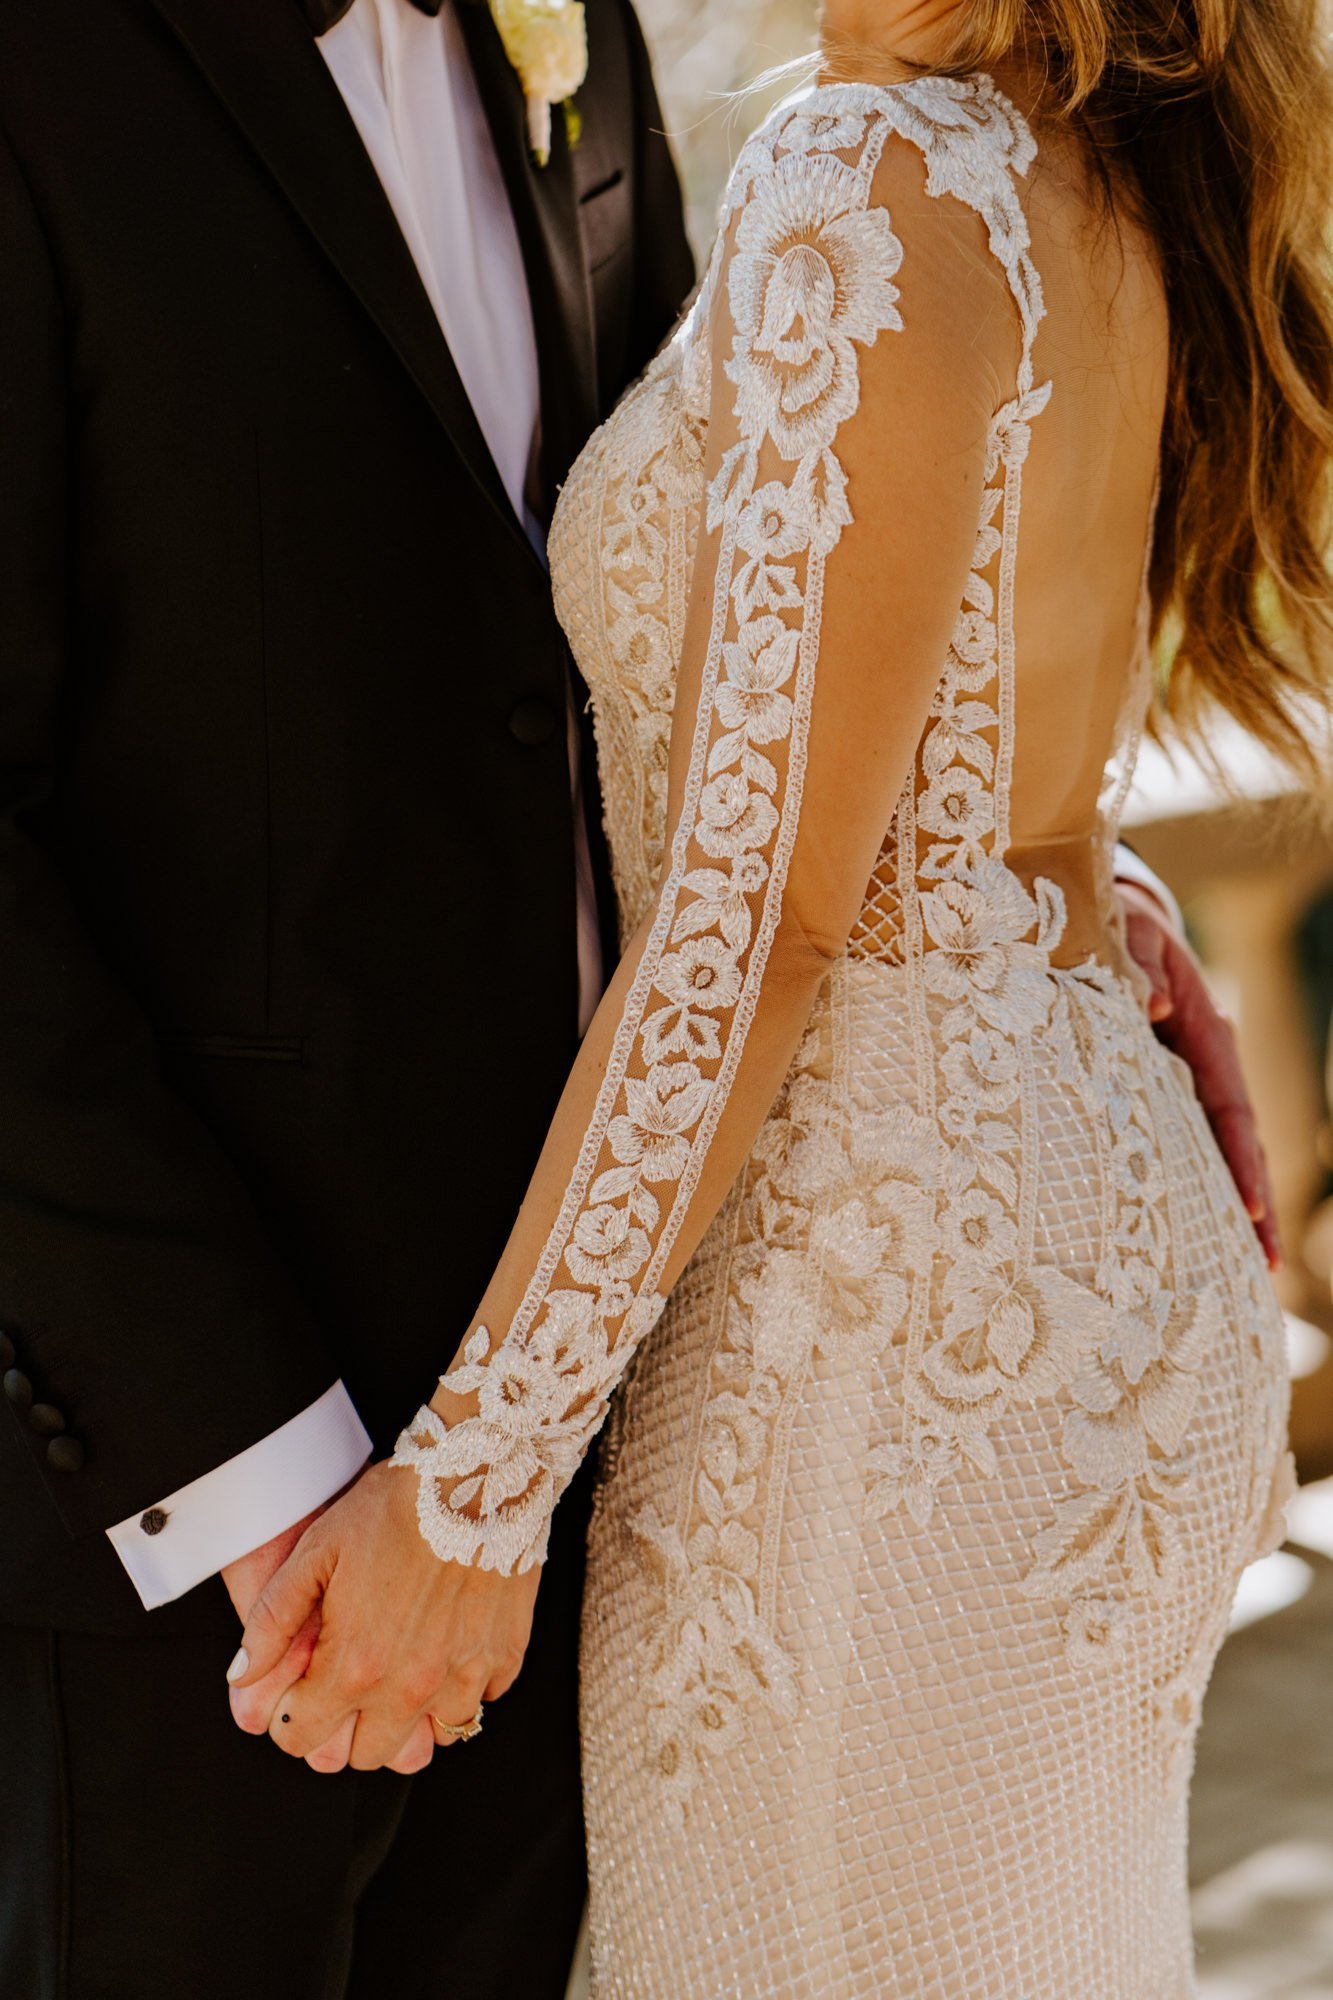 Galia Lahav wedding dress long sleeve detailed bridal gown at The Houdini Estate wedding in los angeles, ca. Vibrant and candid los angeles wedding photography by Tida Svy